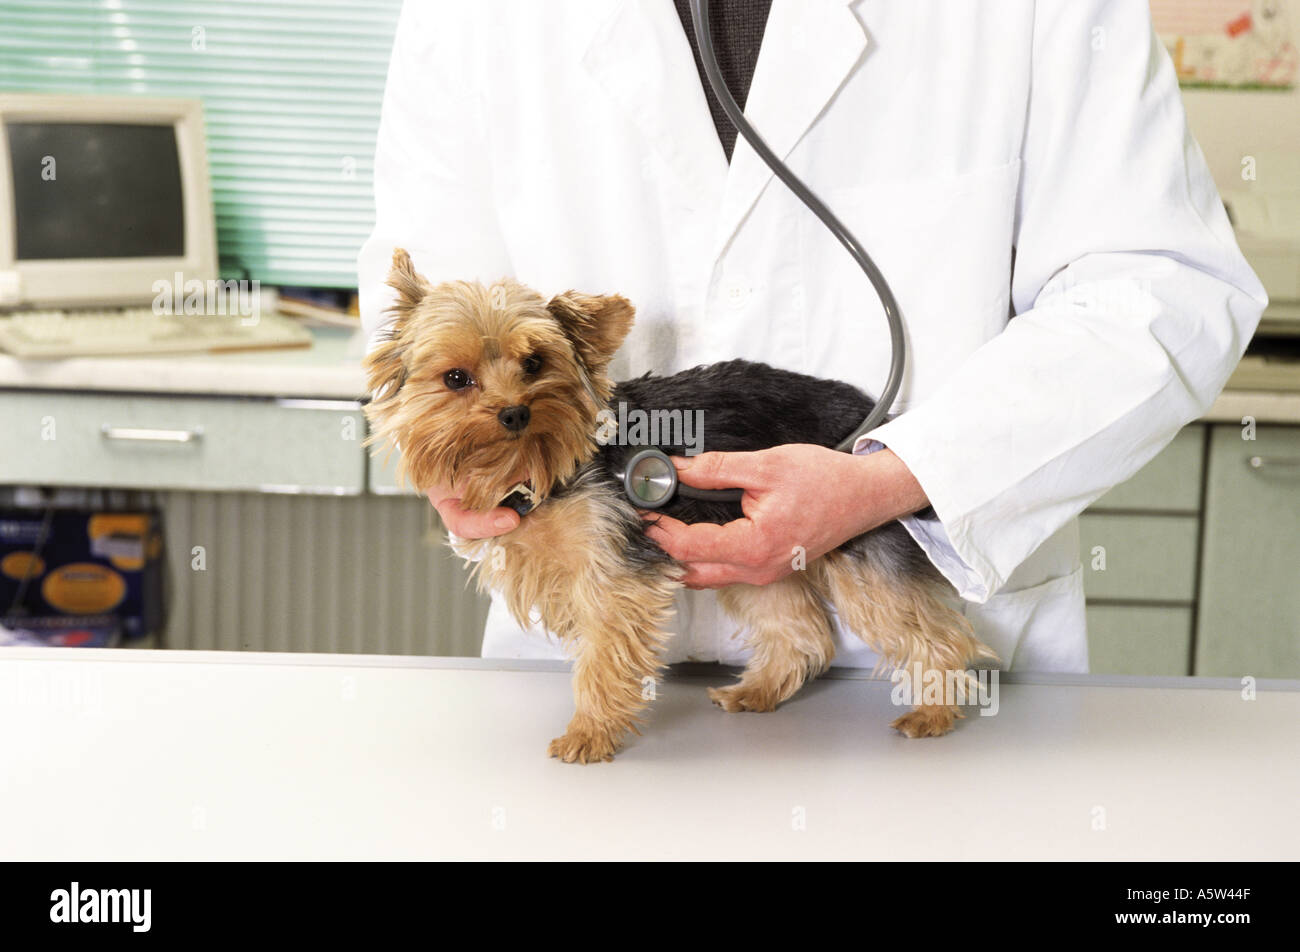 veterinary : Yorkshire Terrier dog being ascultated Stock Photo